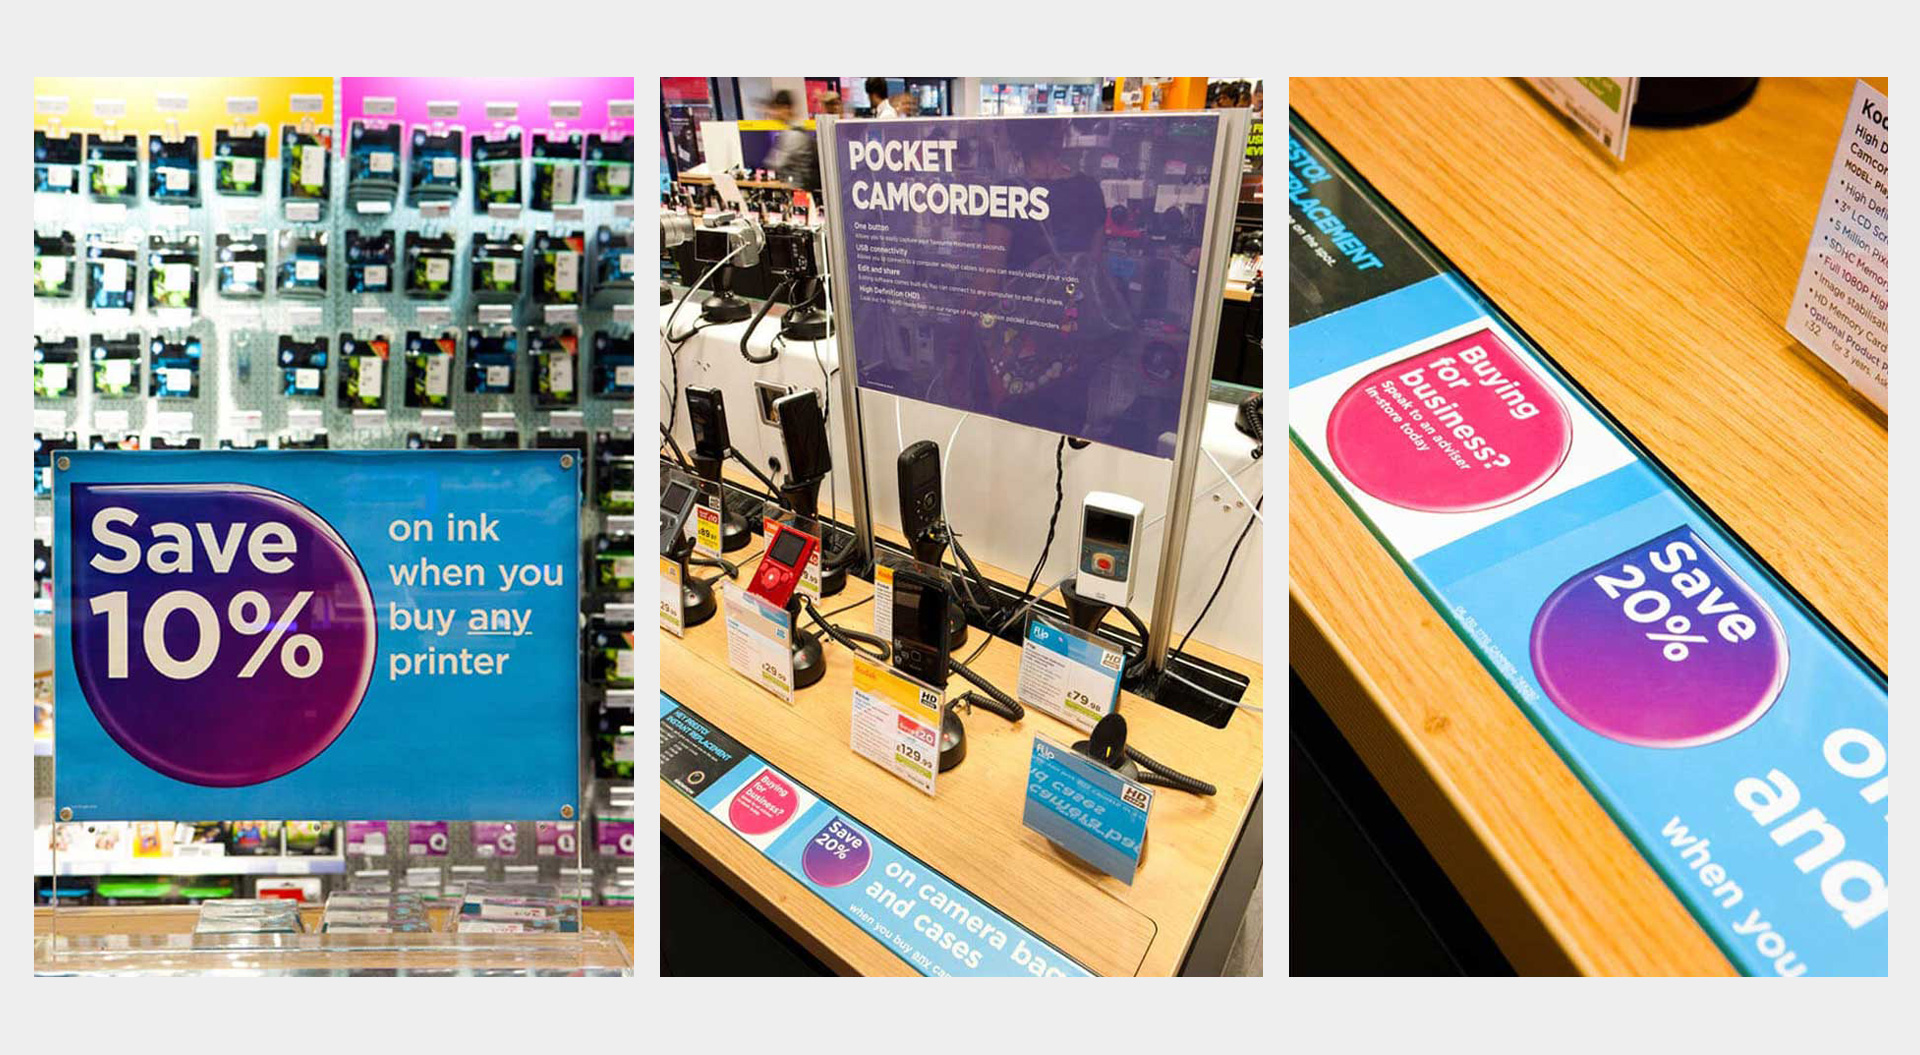 Black Technology, Point of sale material, design and communication